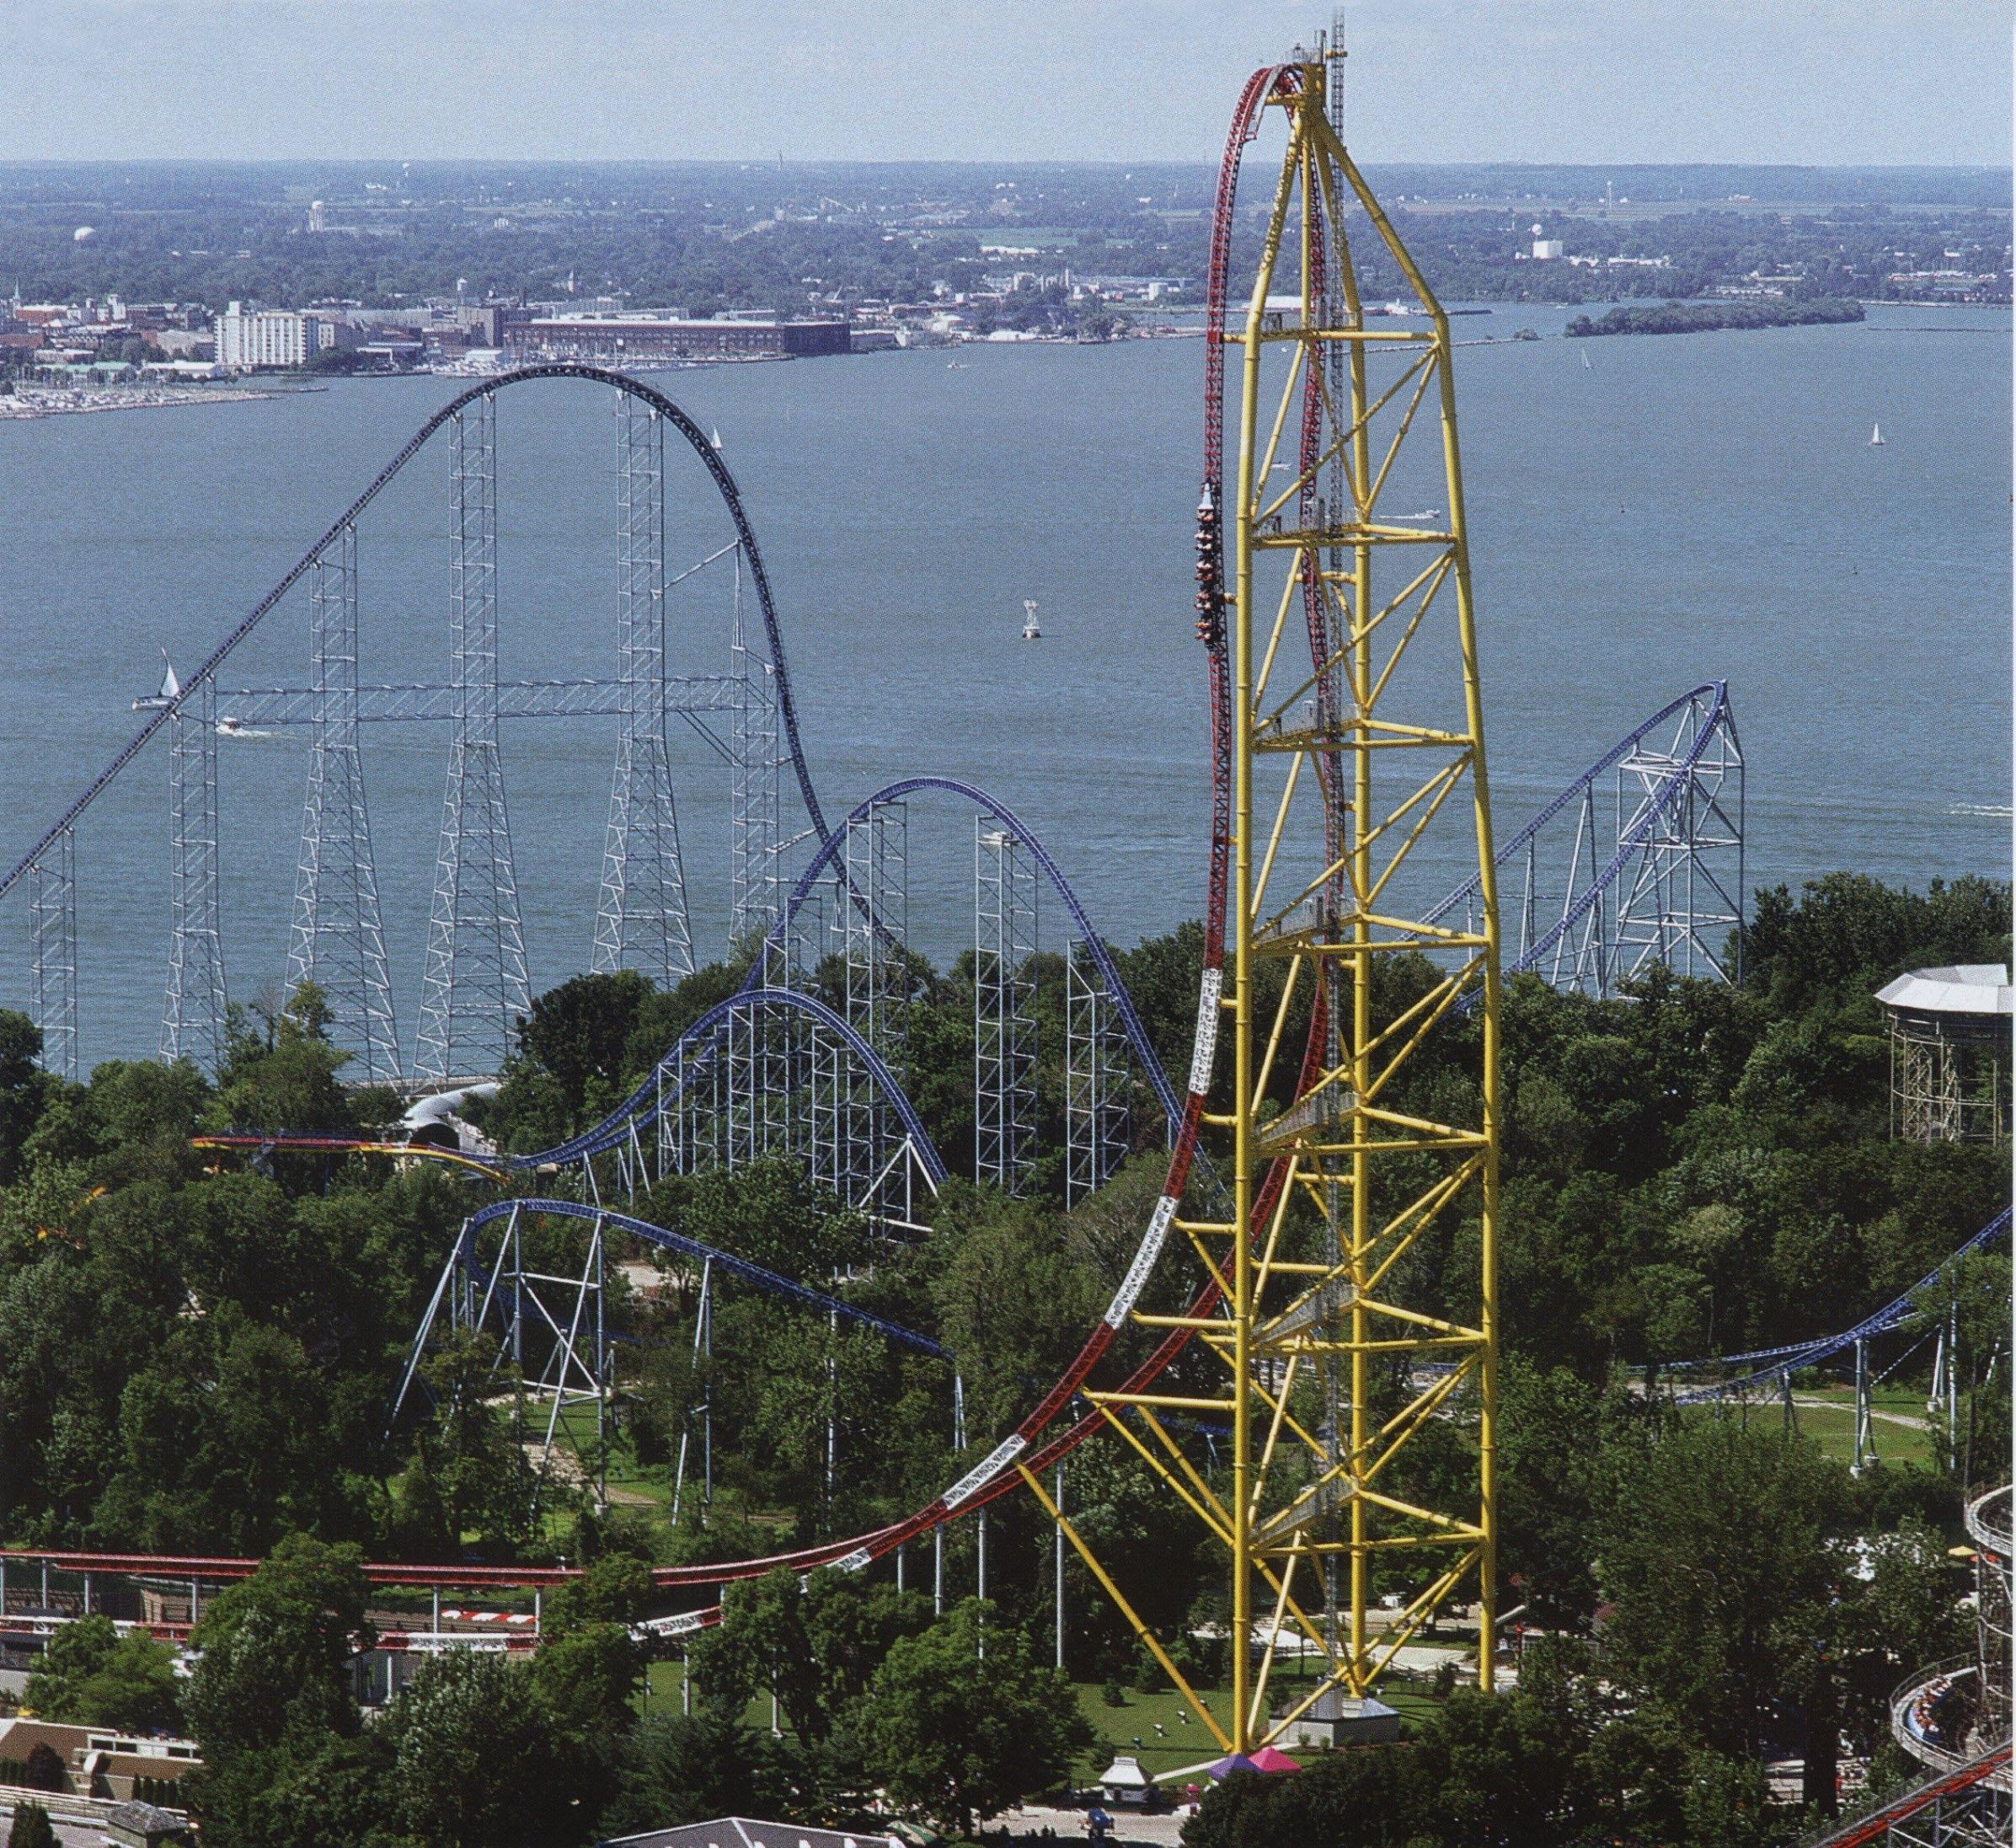 Top Thrill Dragster at Cedar Point in Ohio closed after injury